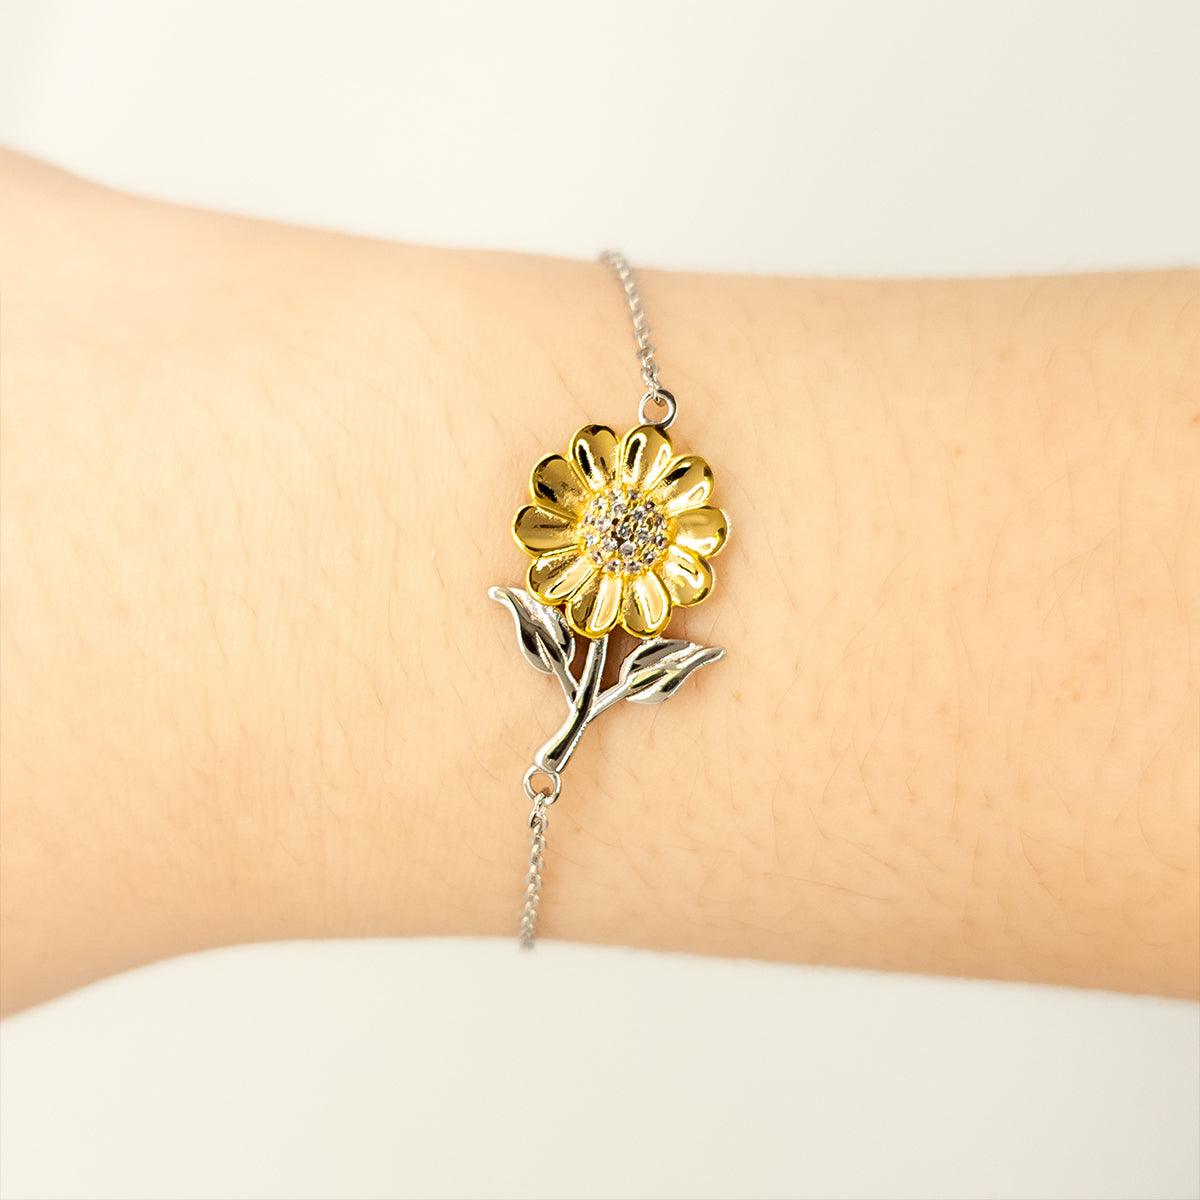 Sarcastic Bookbinder Sunflower Bracelet Gifts, Christmas Holiday Gifts for Bookbinder Birthday Message Card, Bookbinder: Because greatness is woven into the fabric of every day, Coworkers, Friends - Mallard Moon Gift Shop